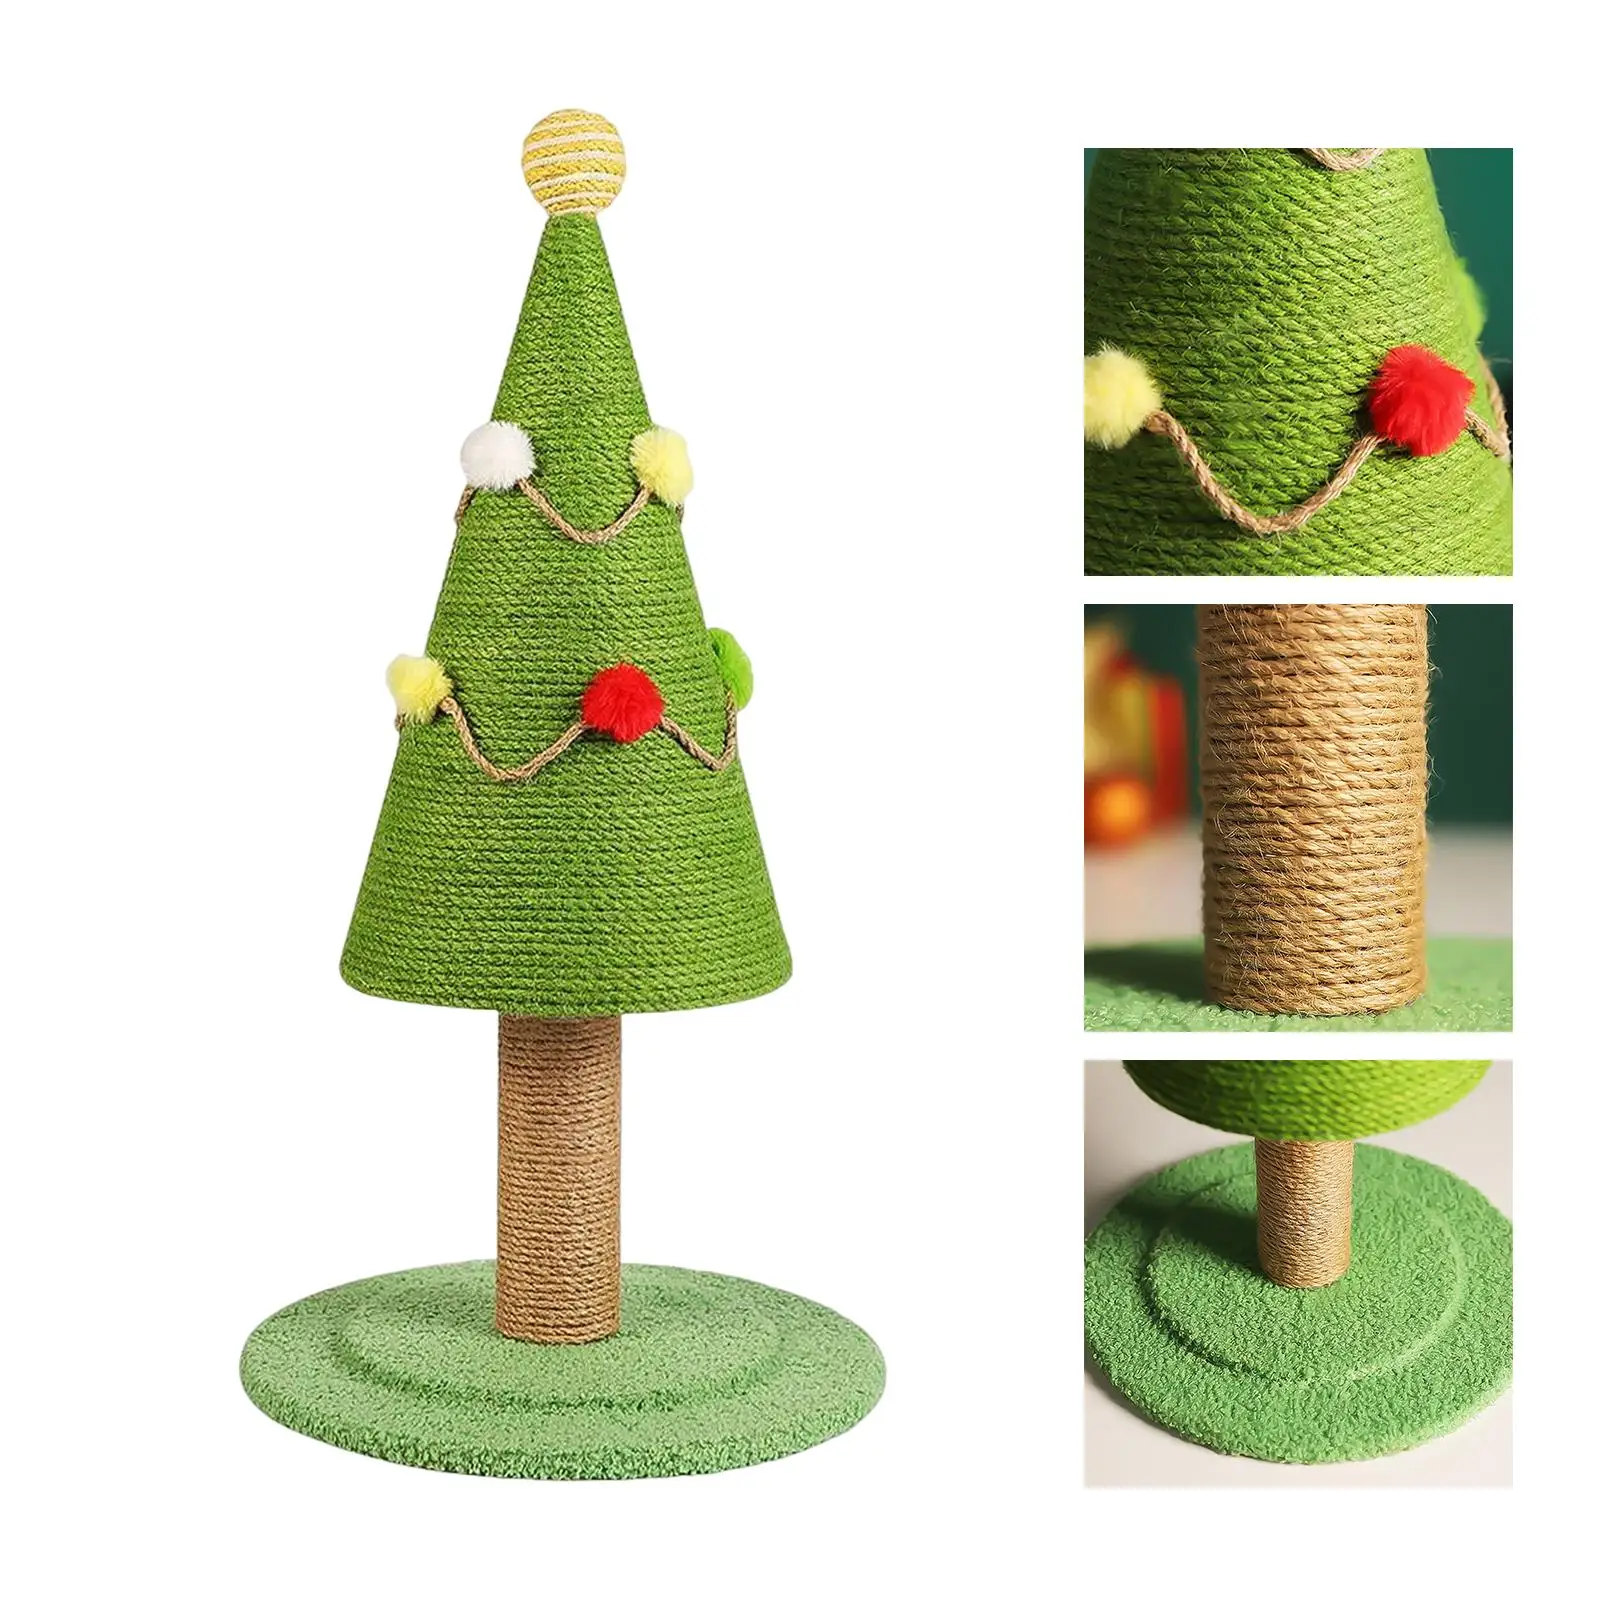 Sisal Cat Scratch Post Xmas  Protective Home Decor Replacement Decorative Claw Scratching for Kitten Bedroom Yard